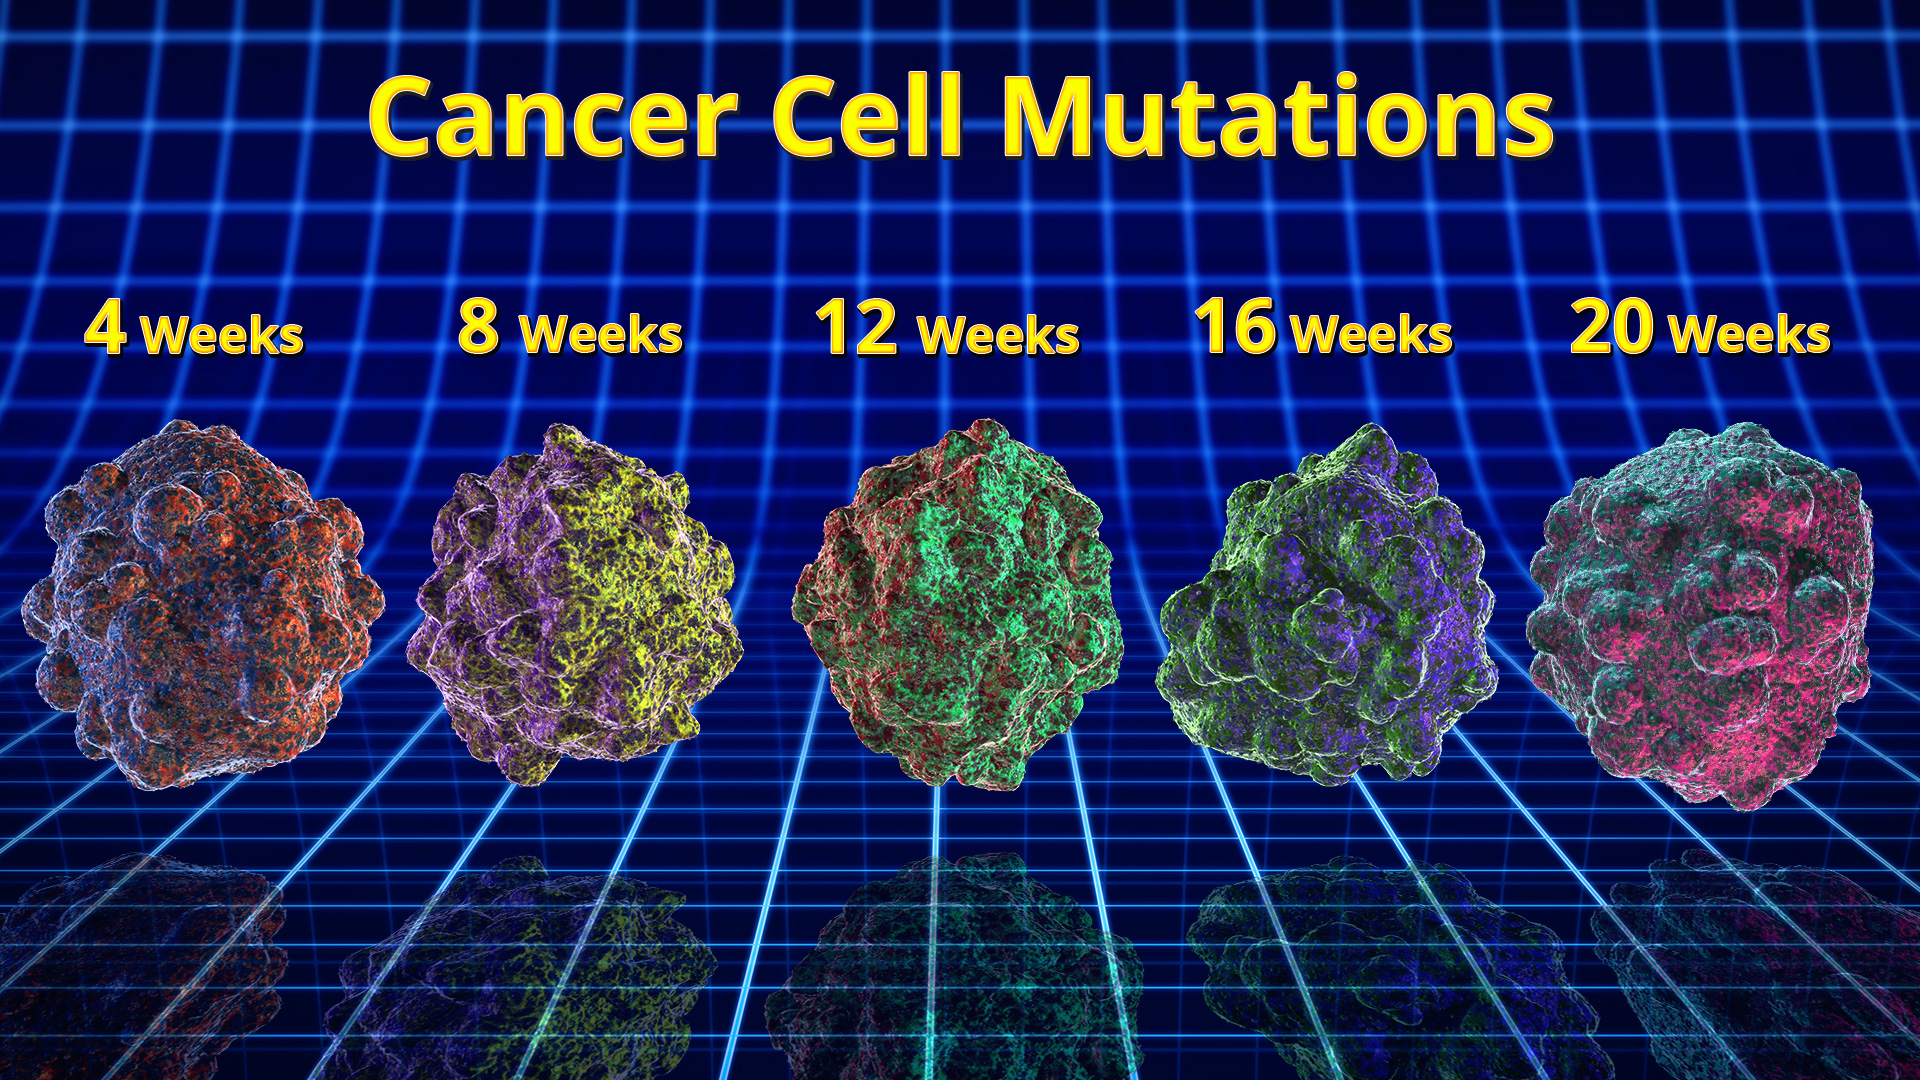 A graphical depiction of cancer cell mutation